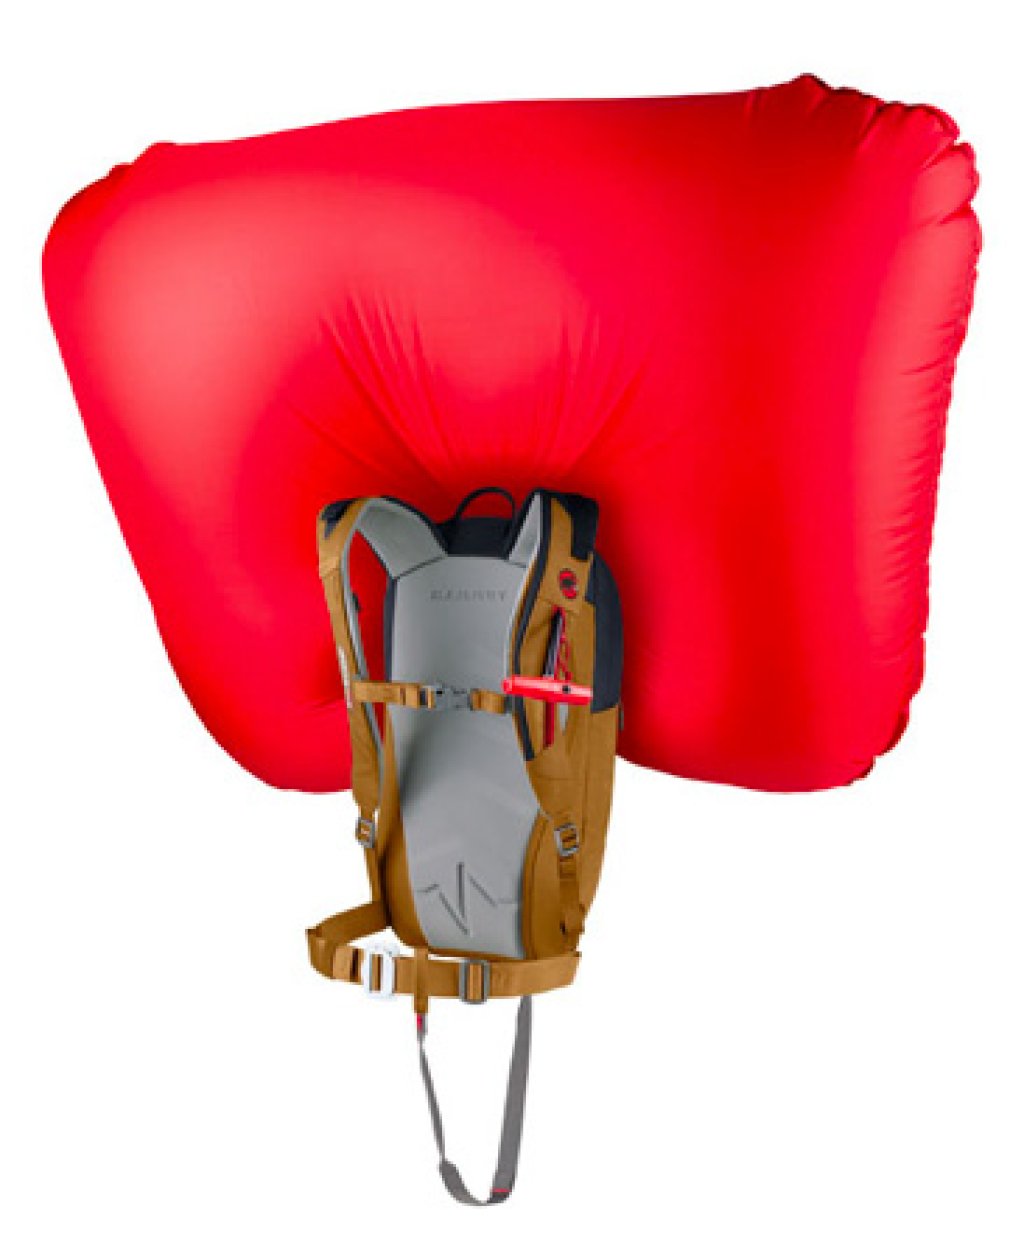 The Removable Airbag System from Mammut